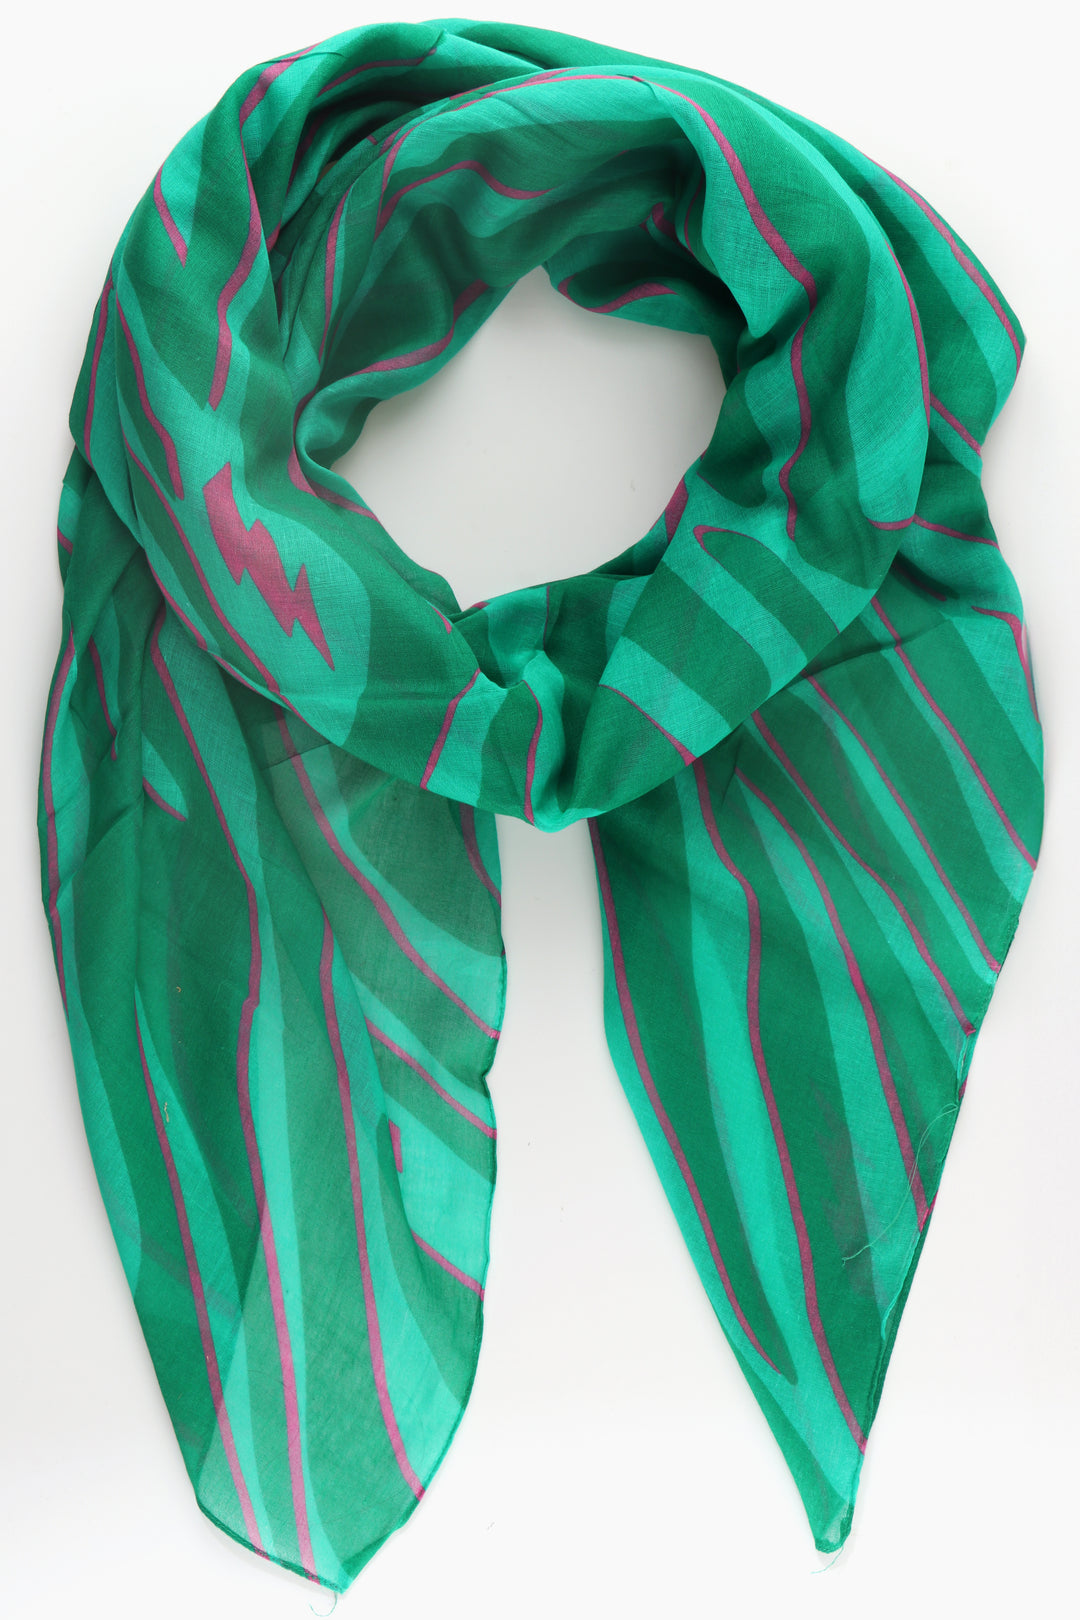 green zebra print cotton scarf with large pink lightning bolt details throughout the design